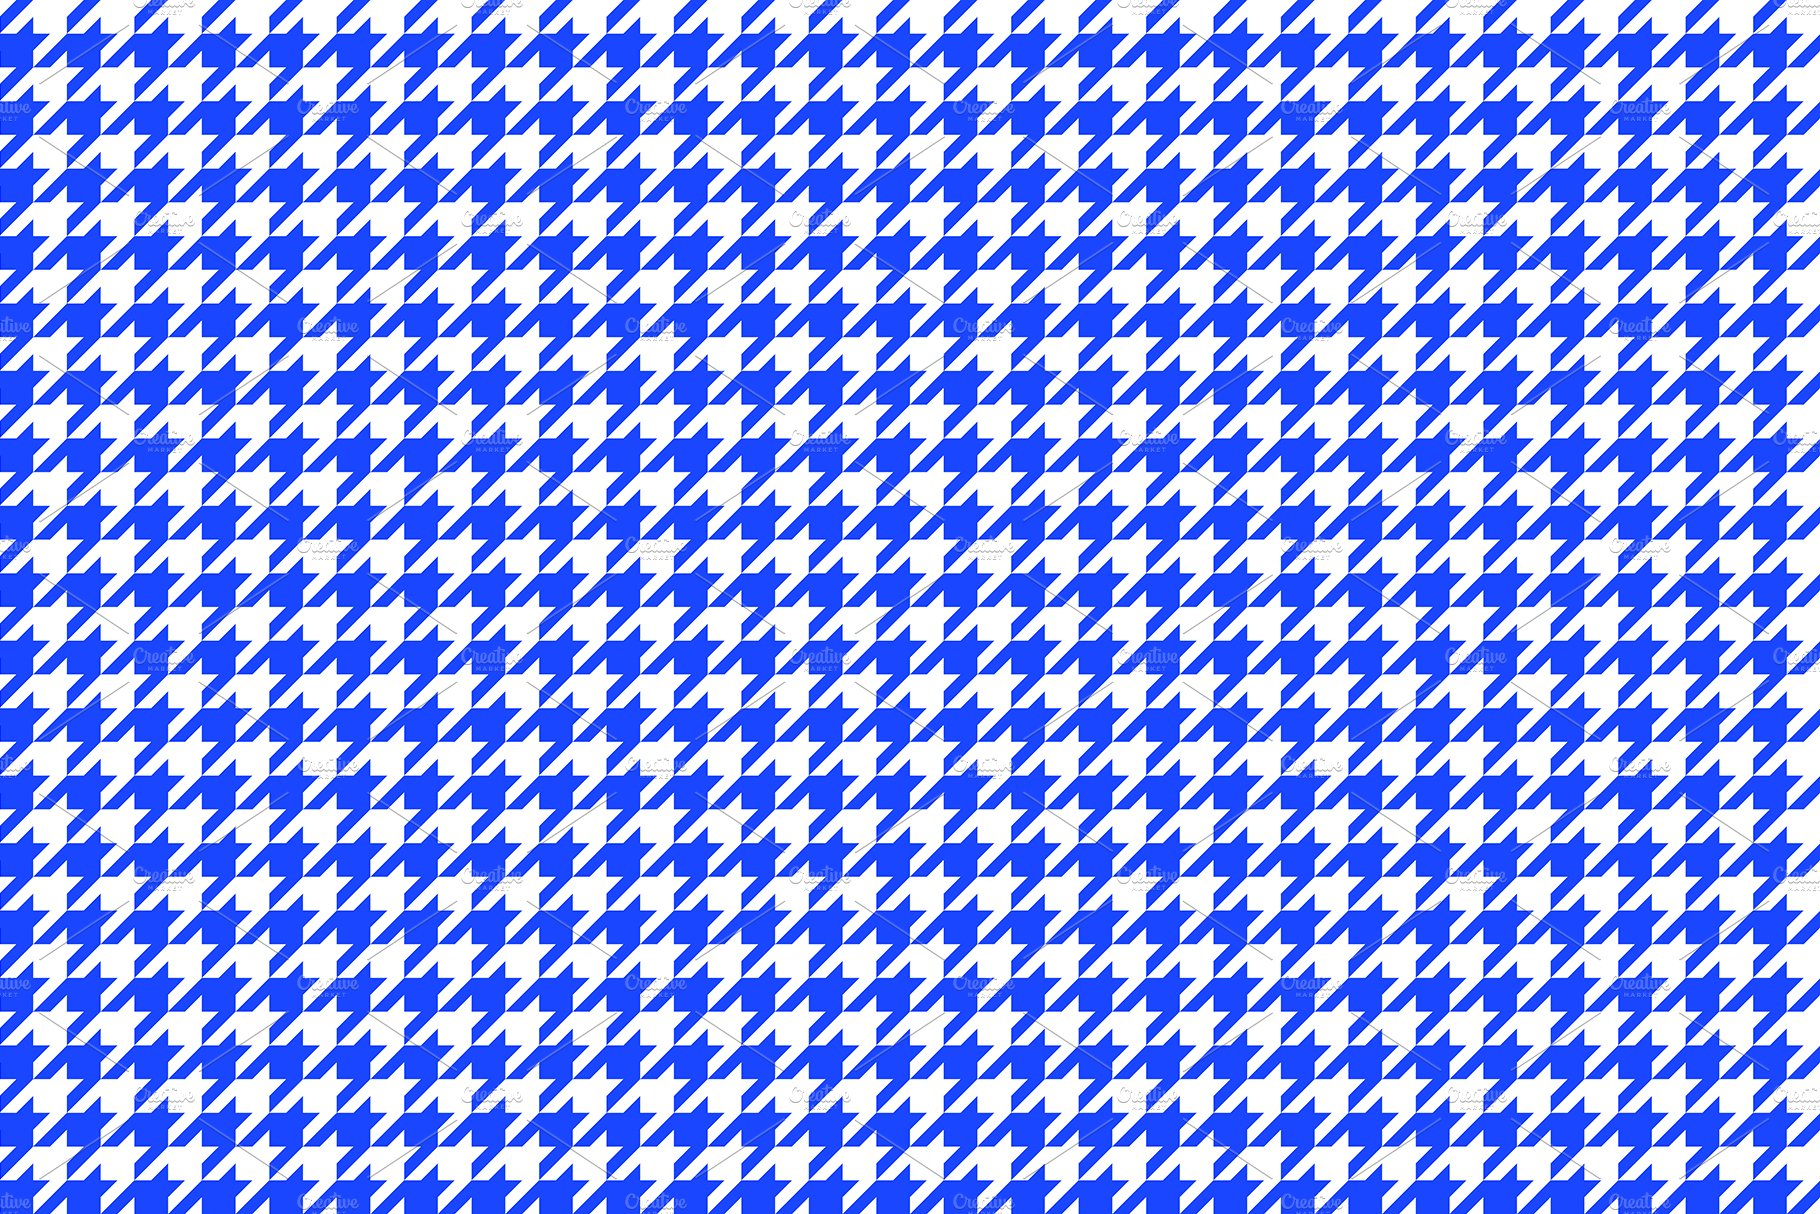 19 houndstooth pattern background texture copy 144